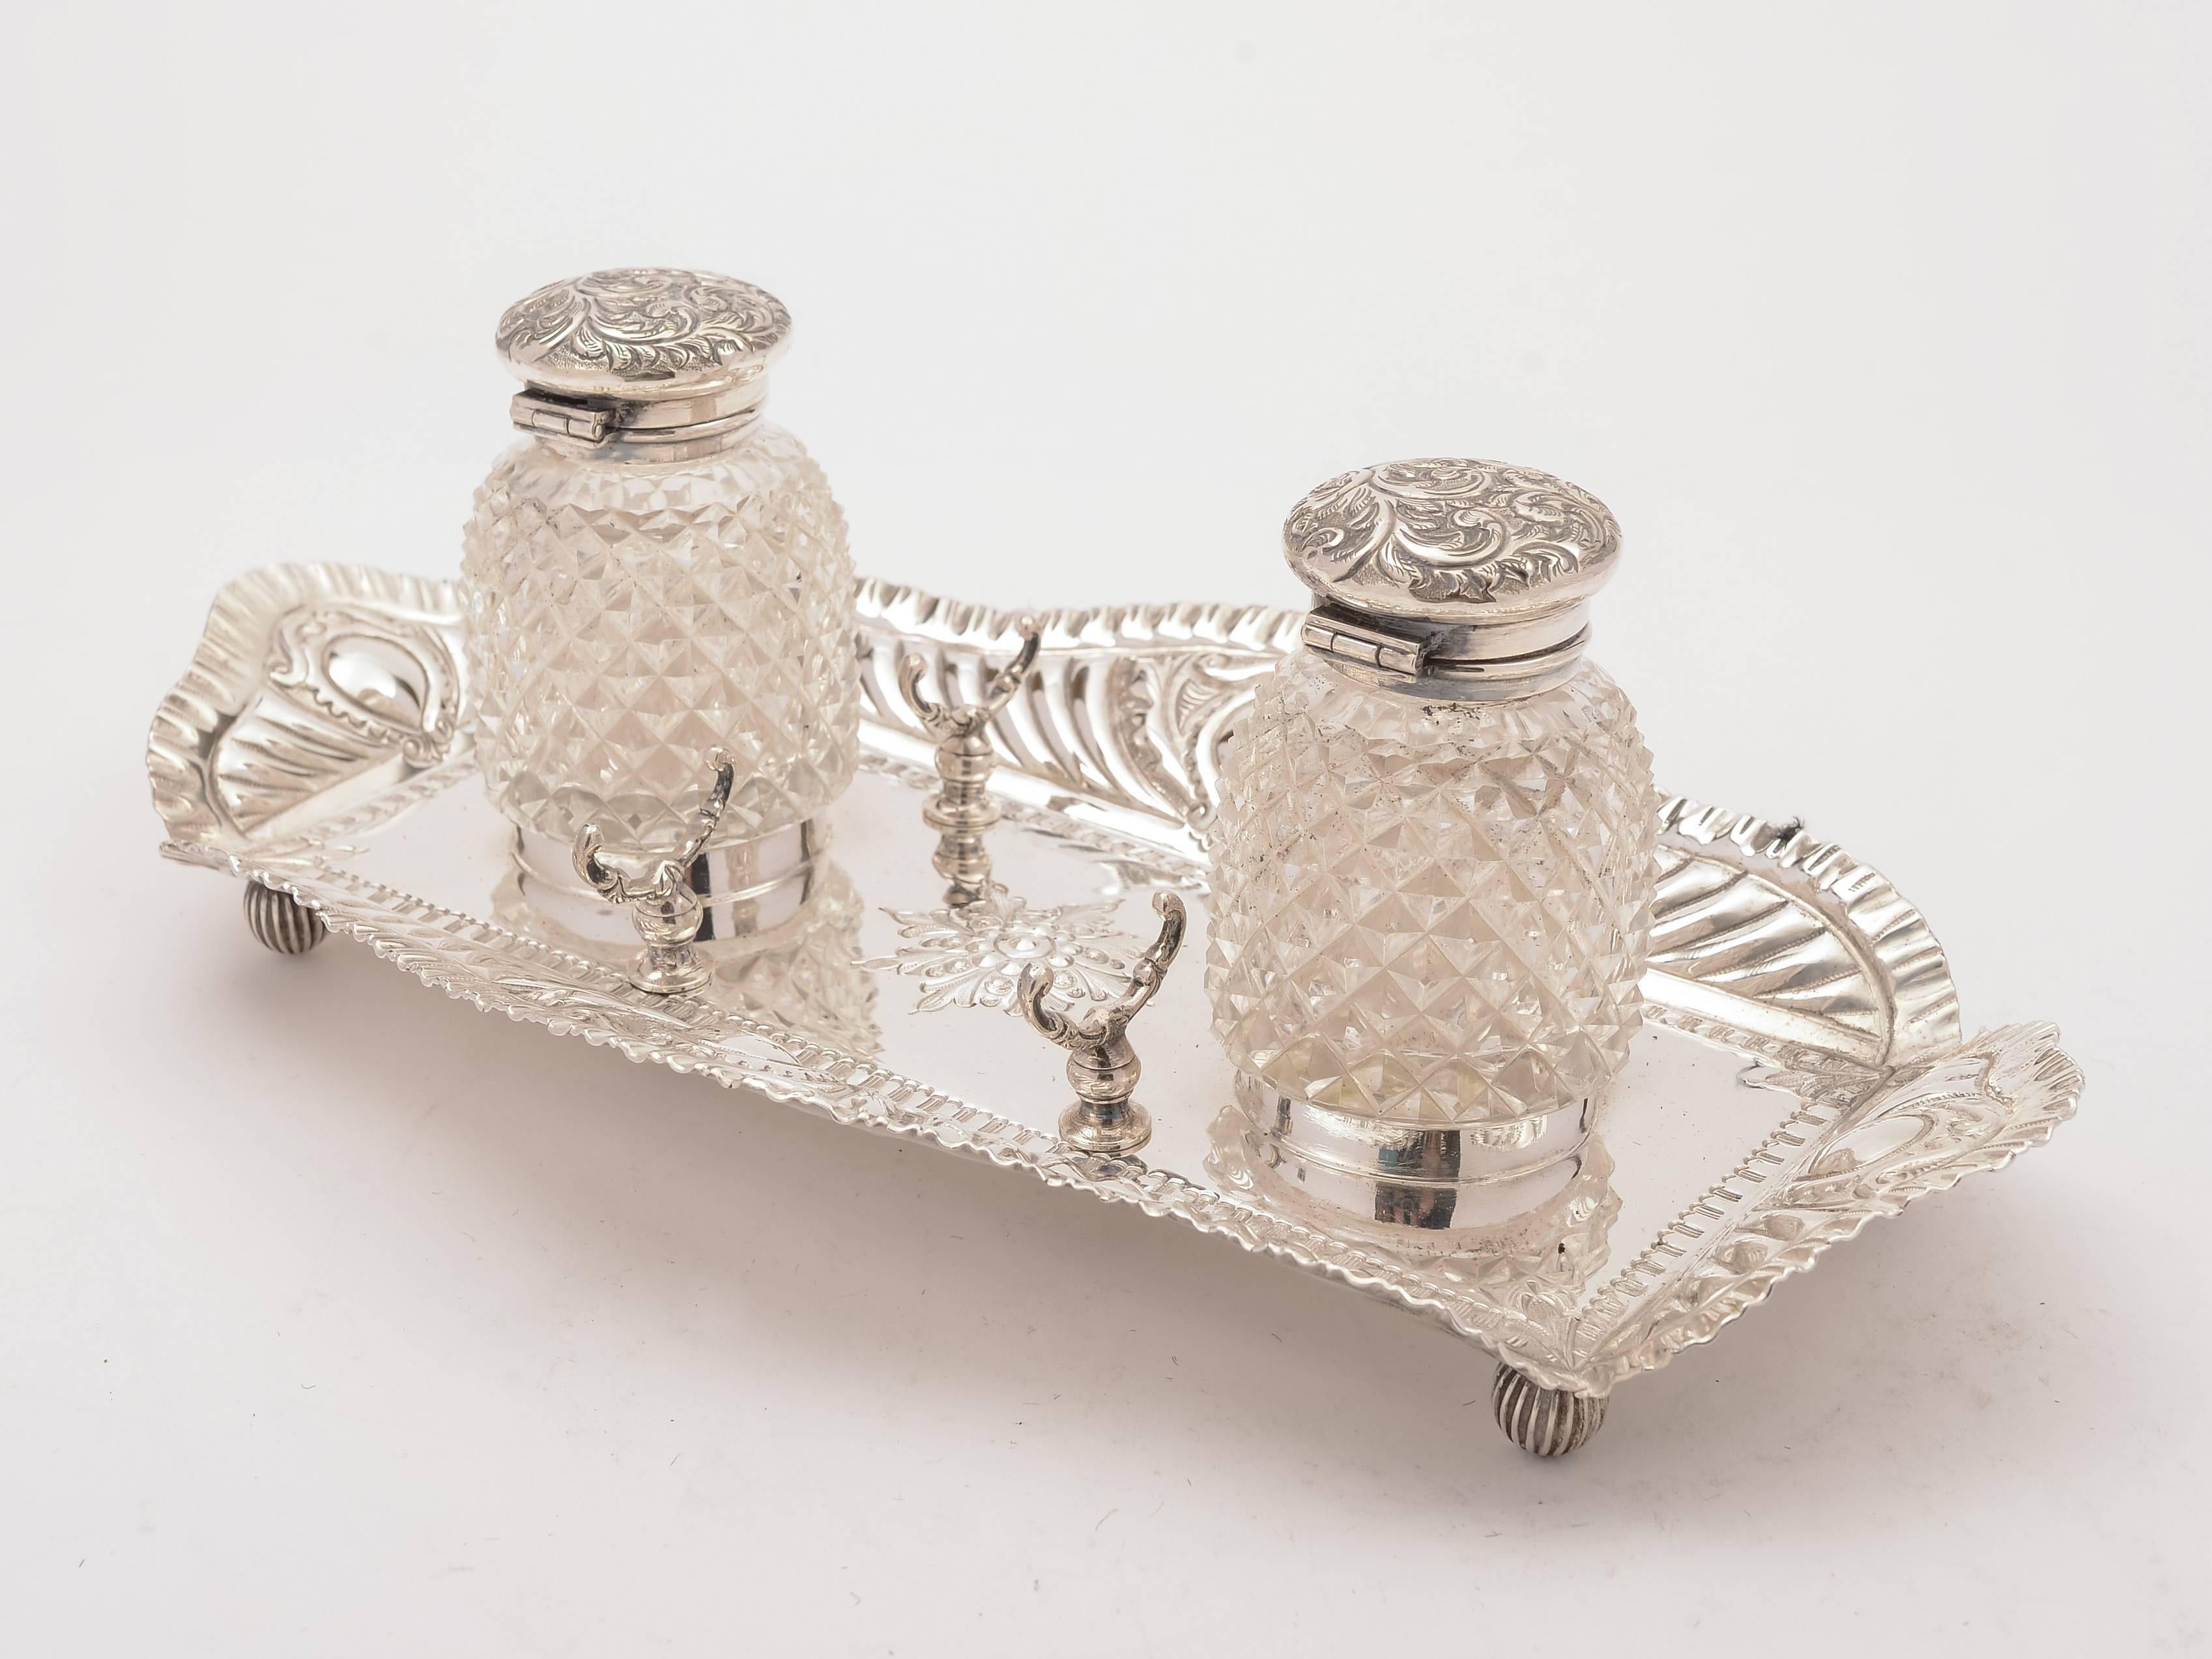 A good English Victorian silver plated double ink stand with pen holders to each side, embossed decoration and stands on 4 ball feet. Has a pair of cut-glass inkwells with embossed flip-up lids, circa 1890.

 

Measurements:
Total height 3 1/2